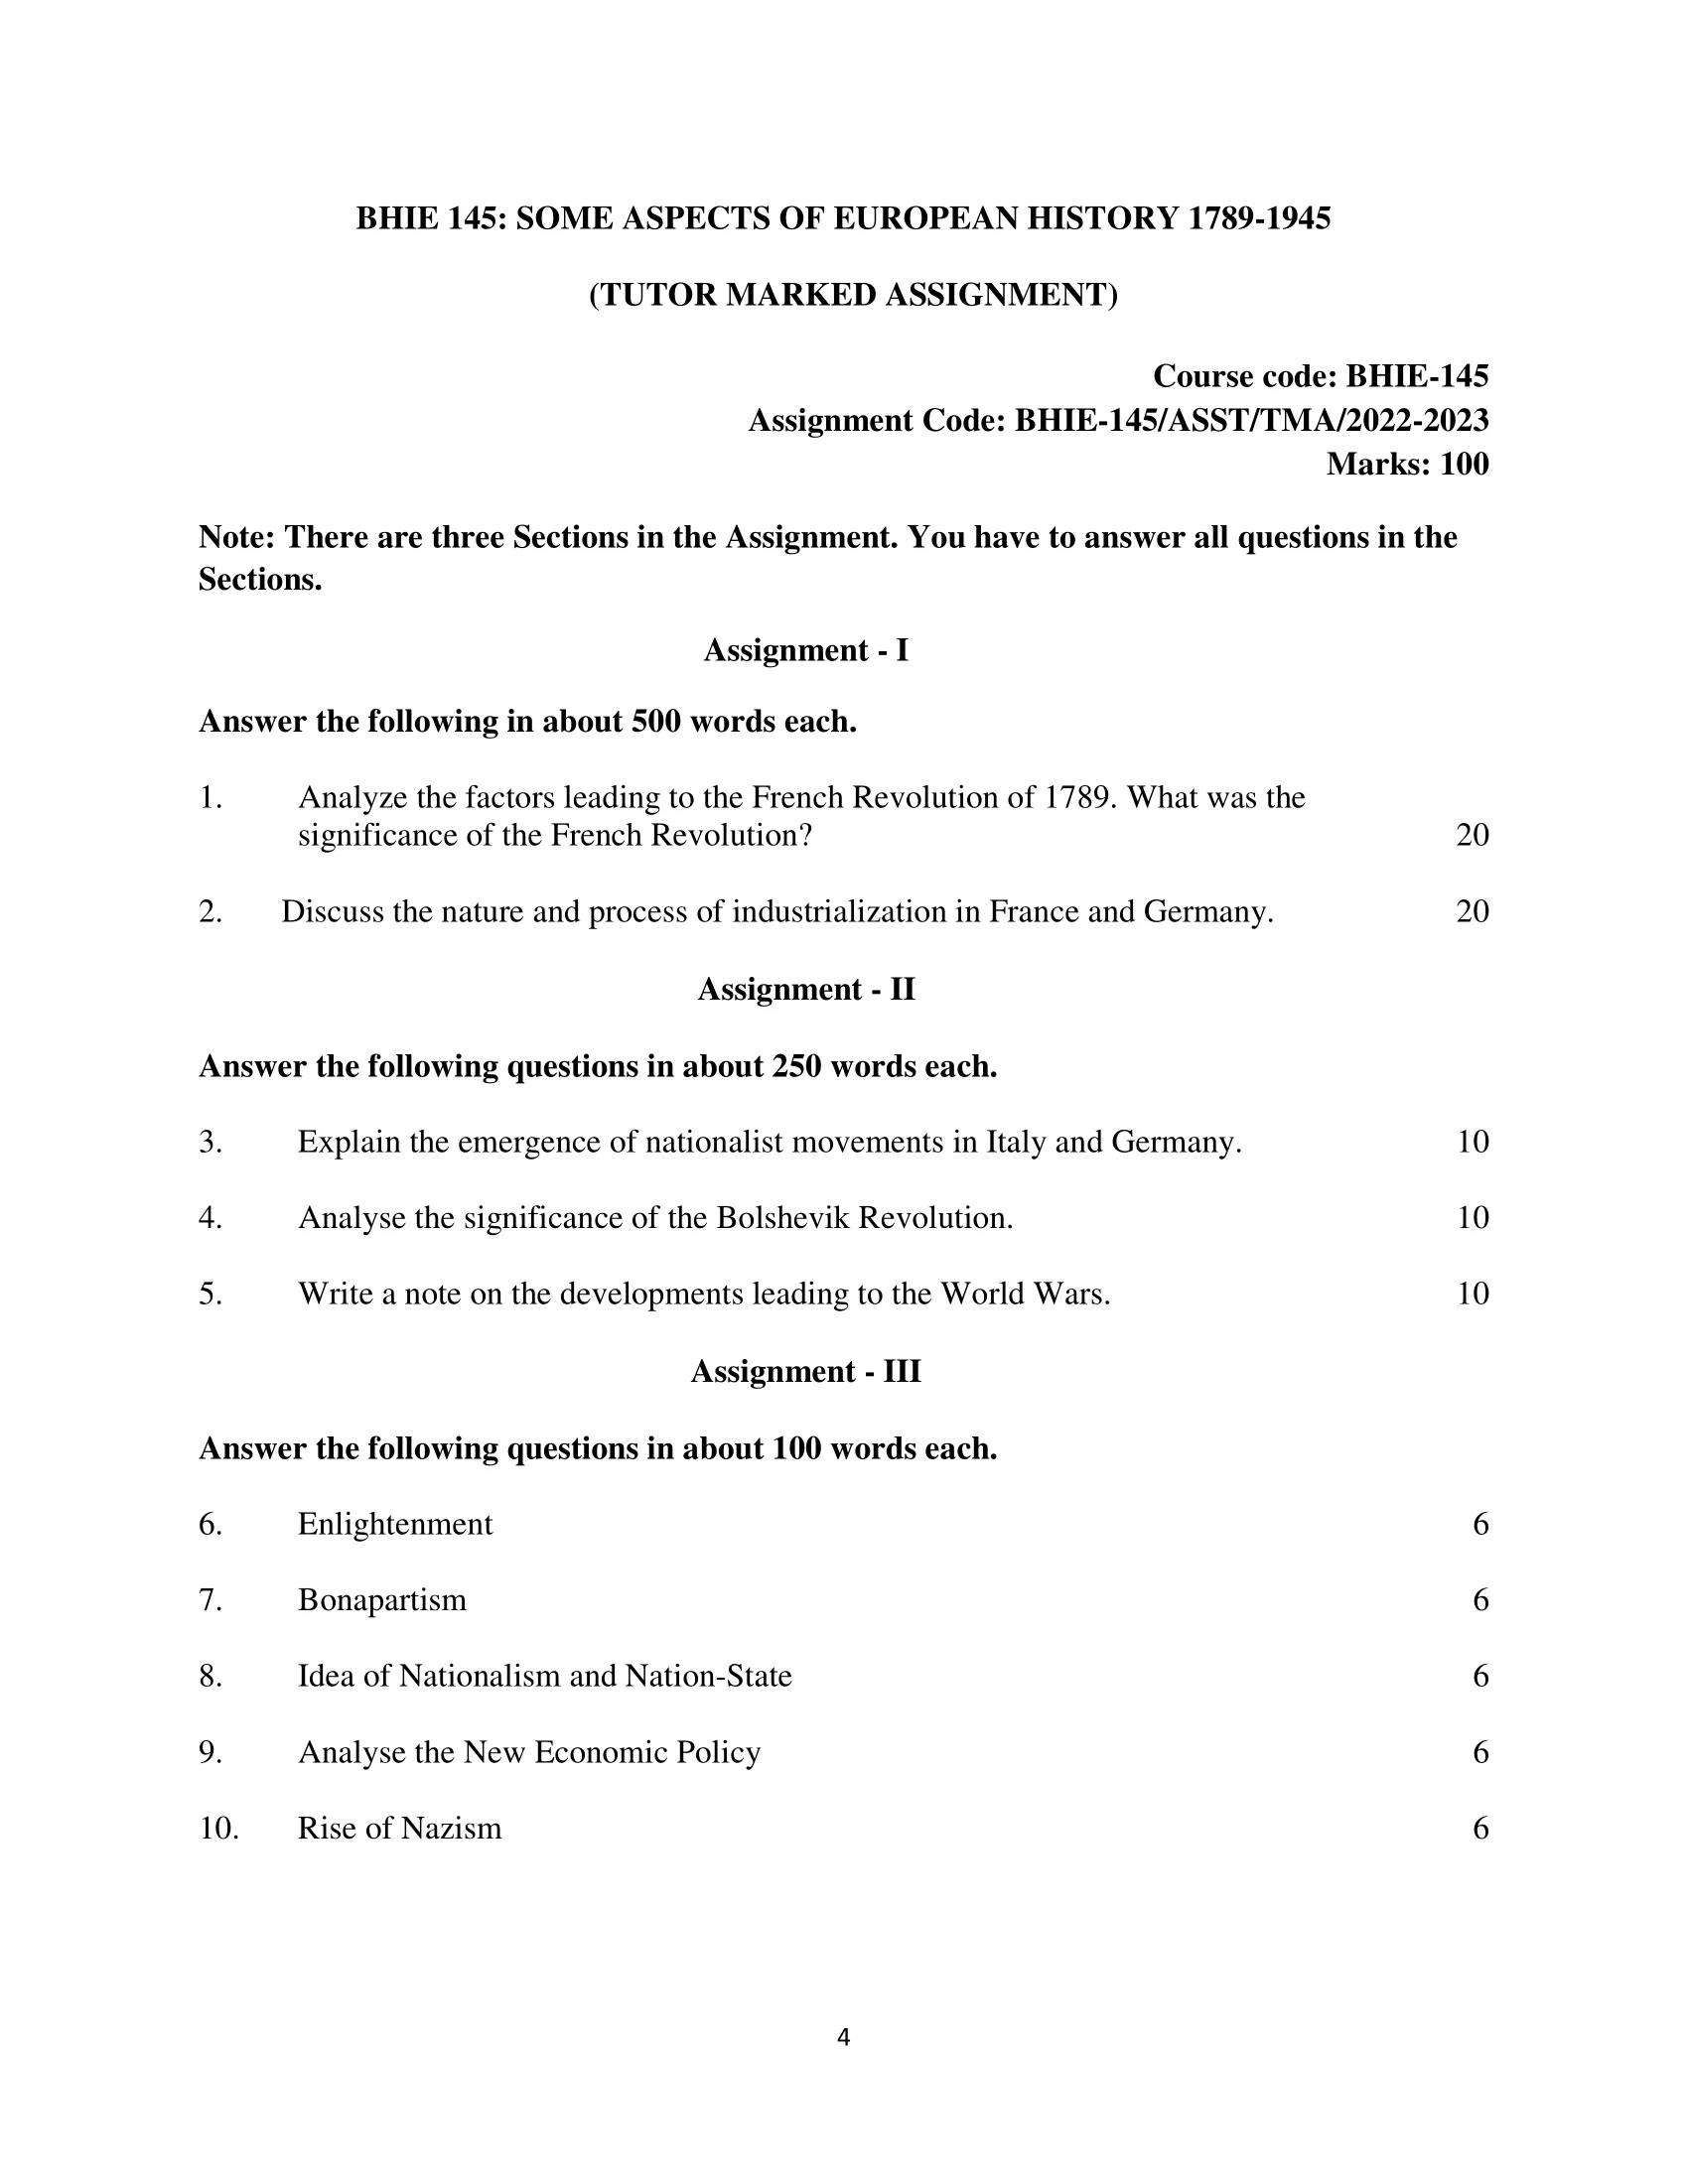 BHIE-145 IGNOU Solved Assignment 2022-2023 SOME ASPECTS OF EUROPEAN HISTORY 1789-1945